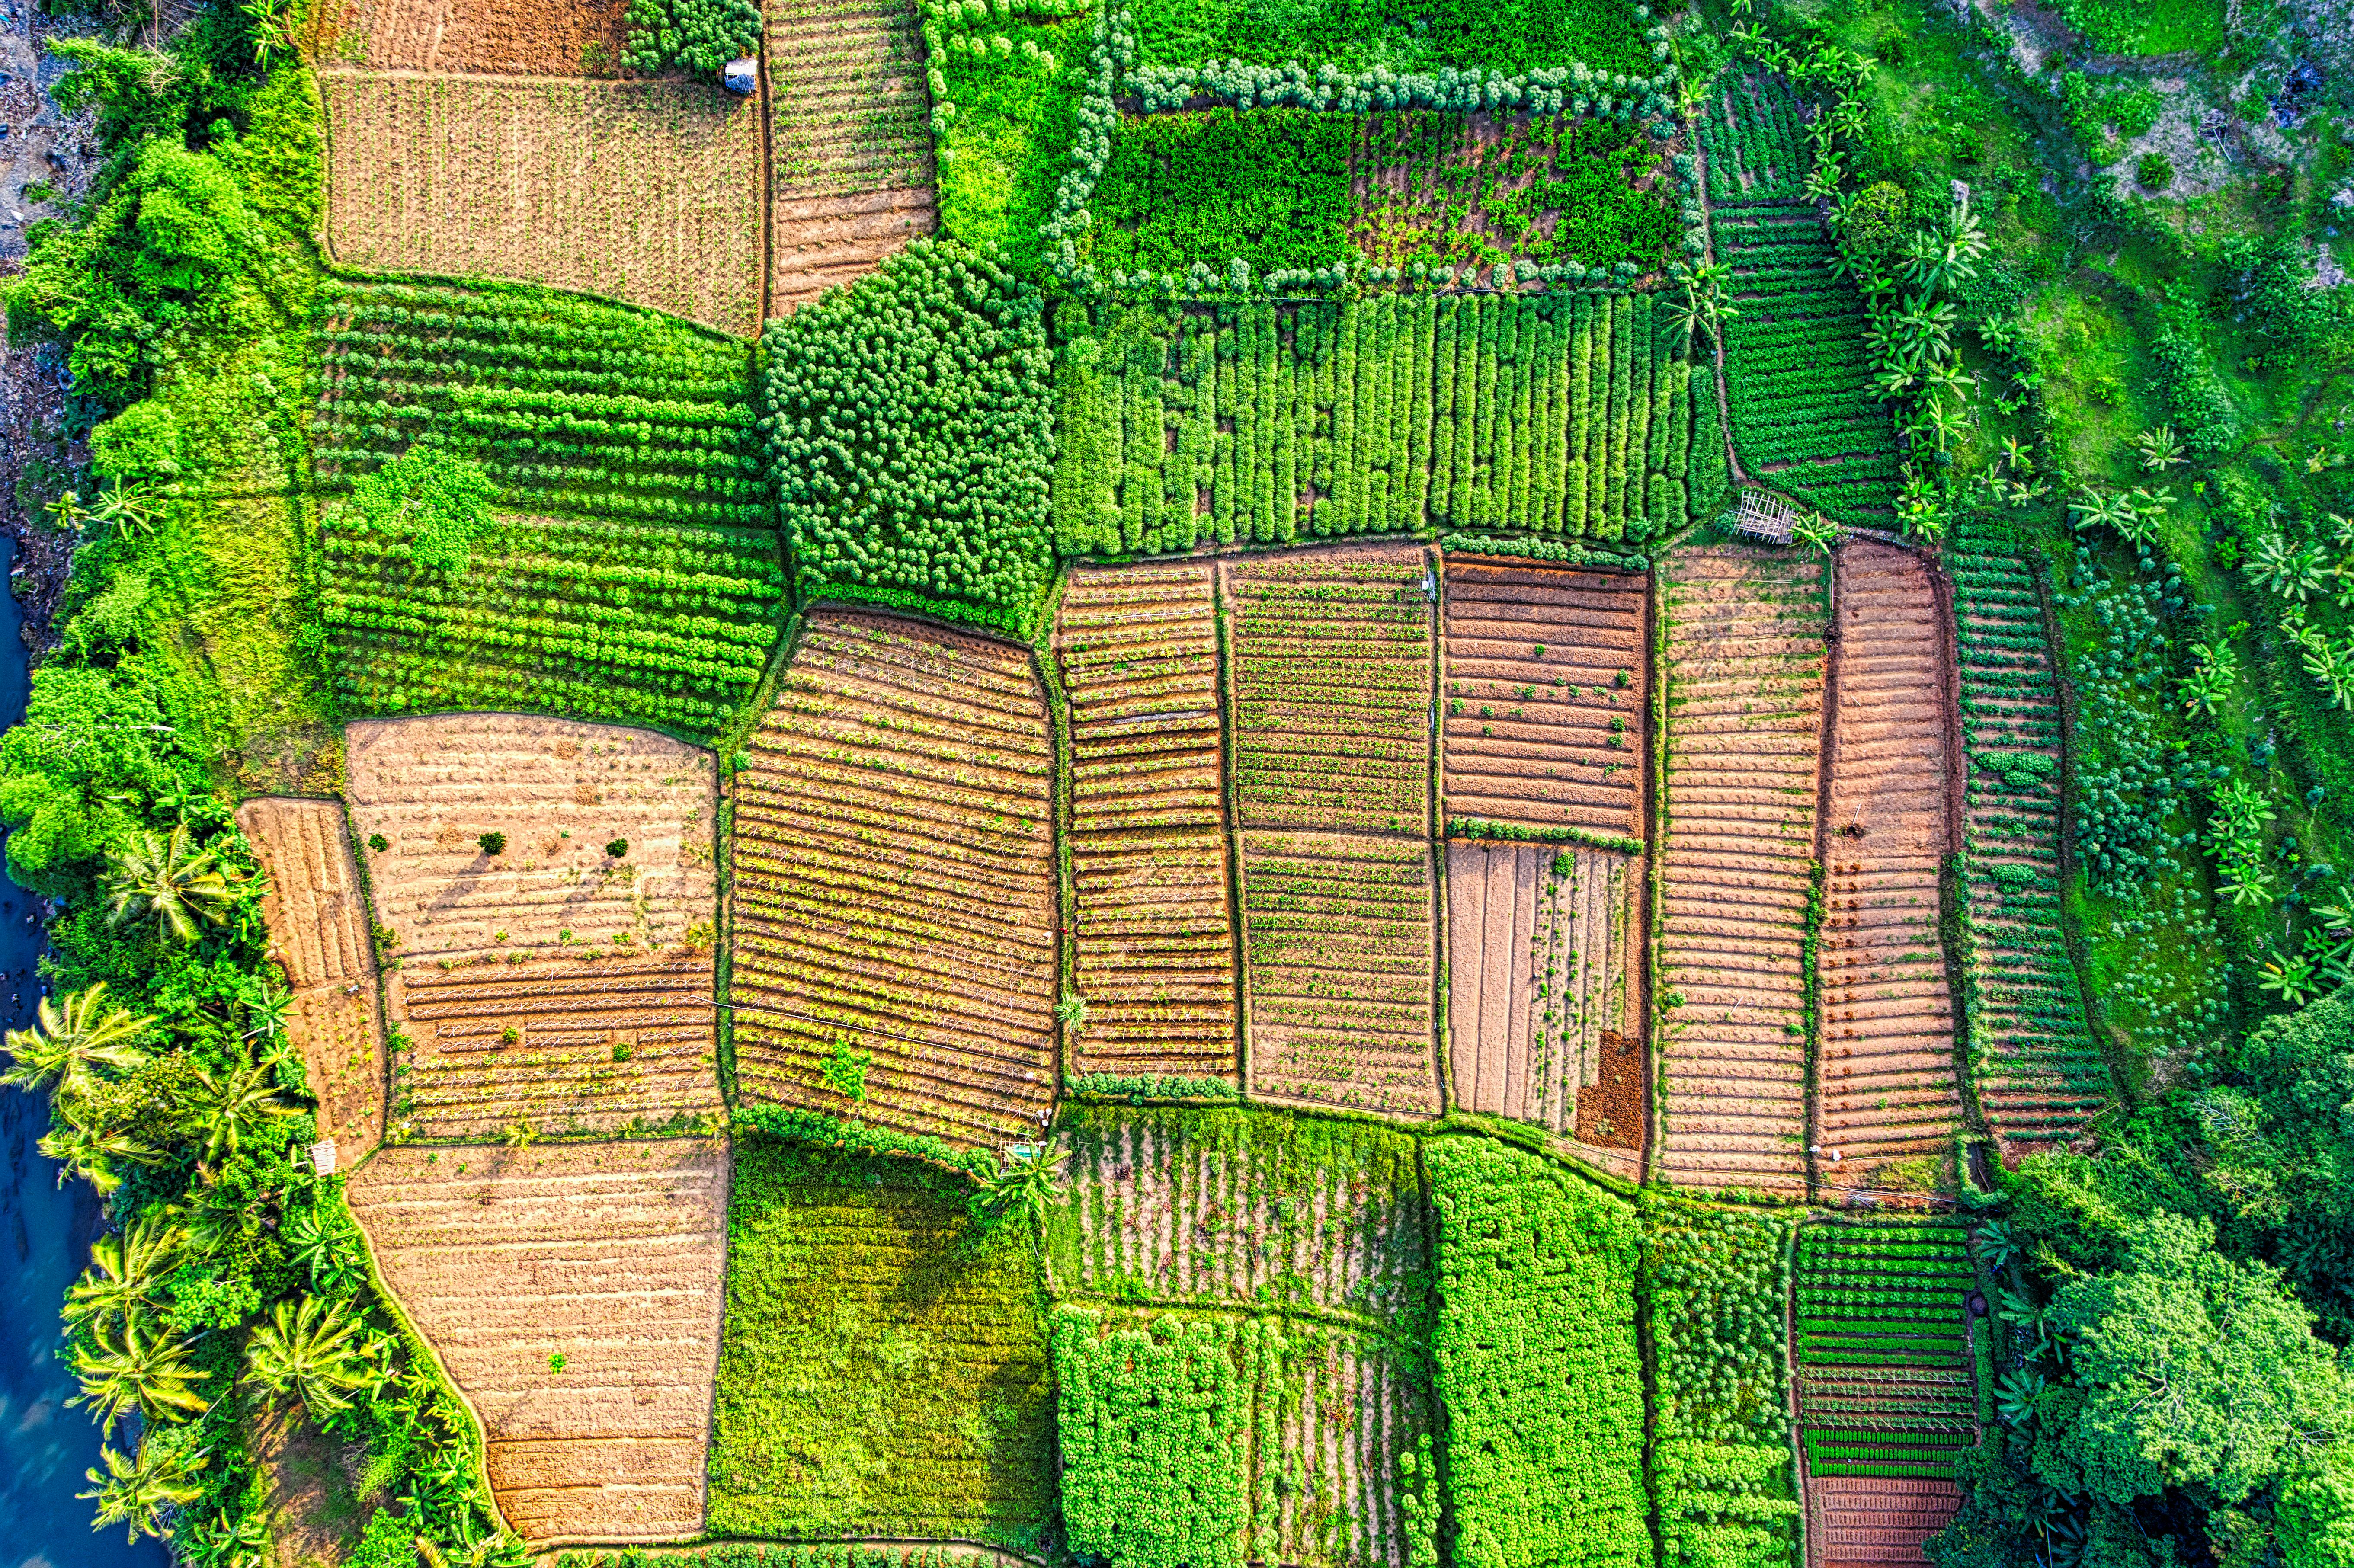 aerial photography of green fields